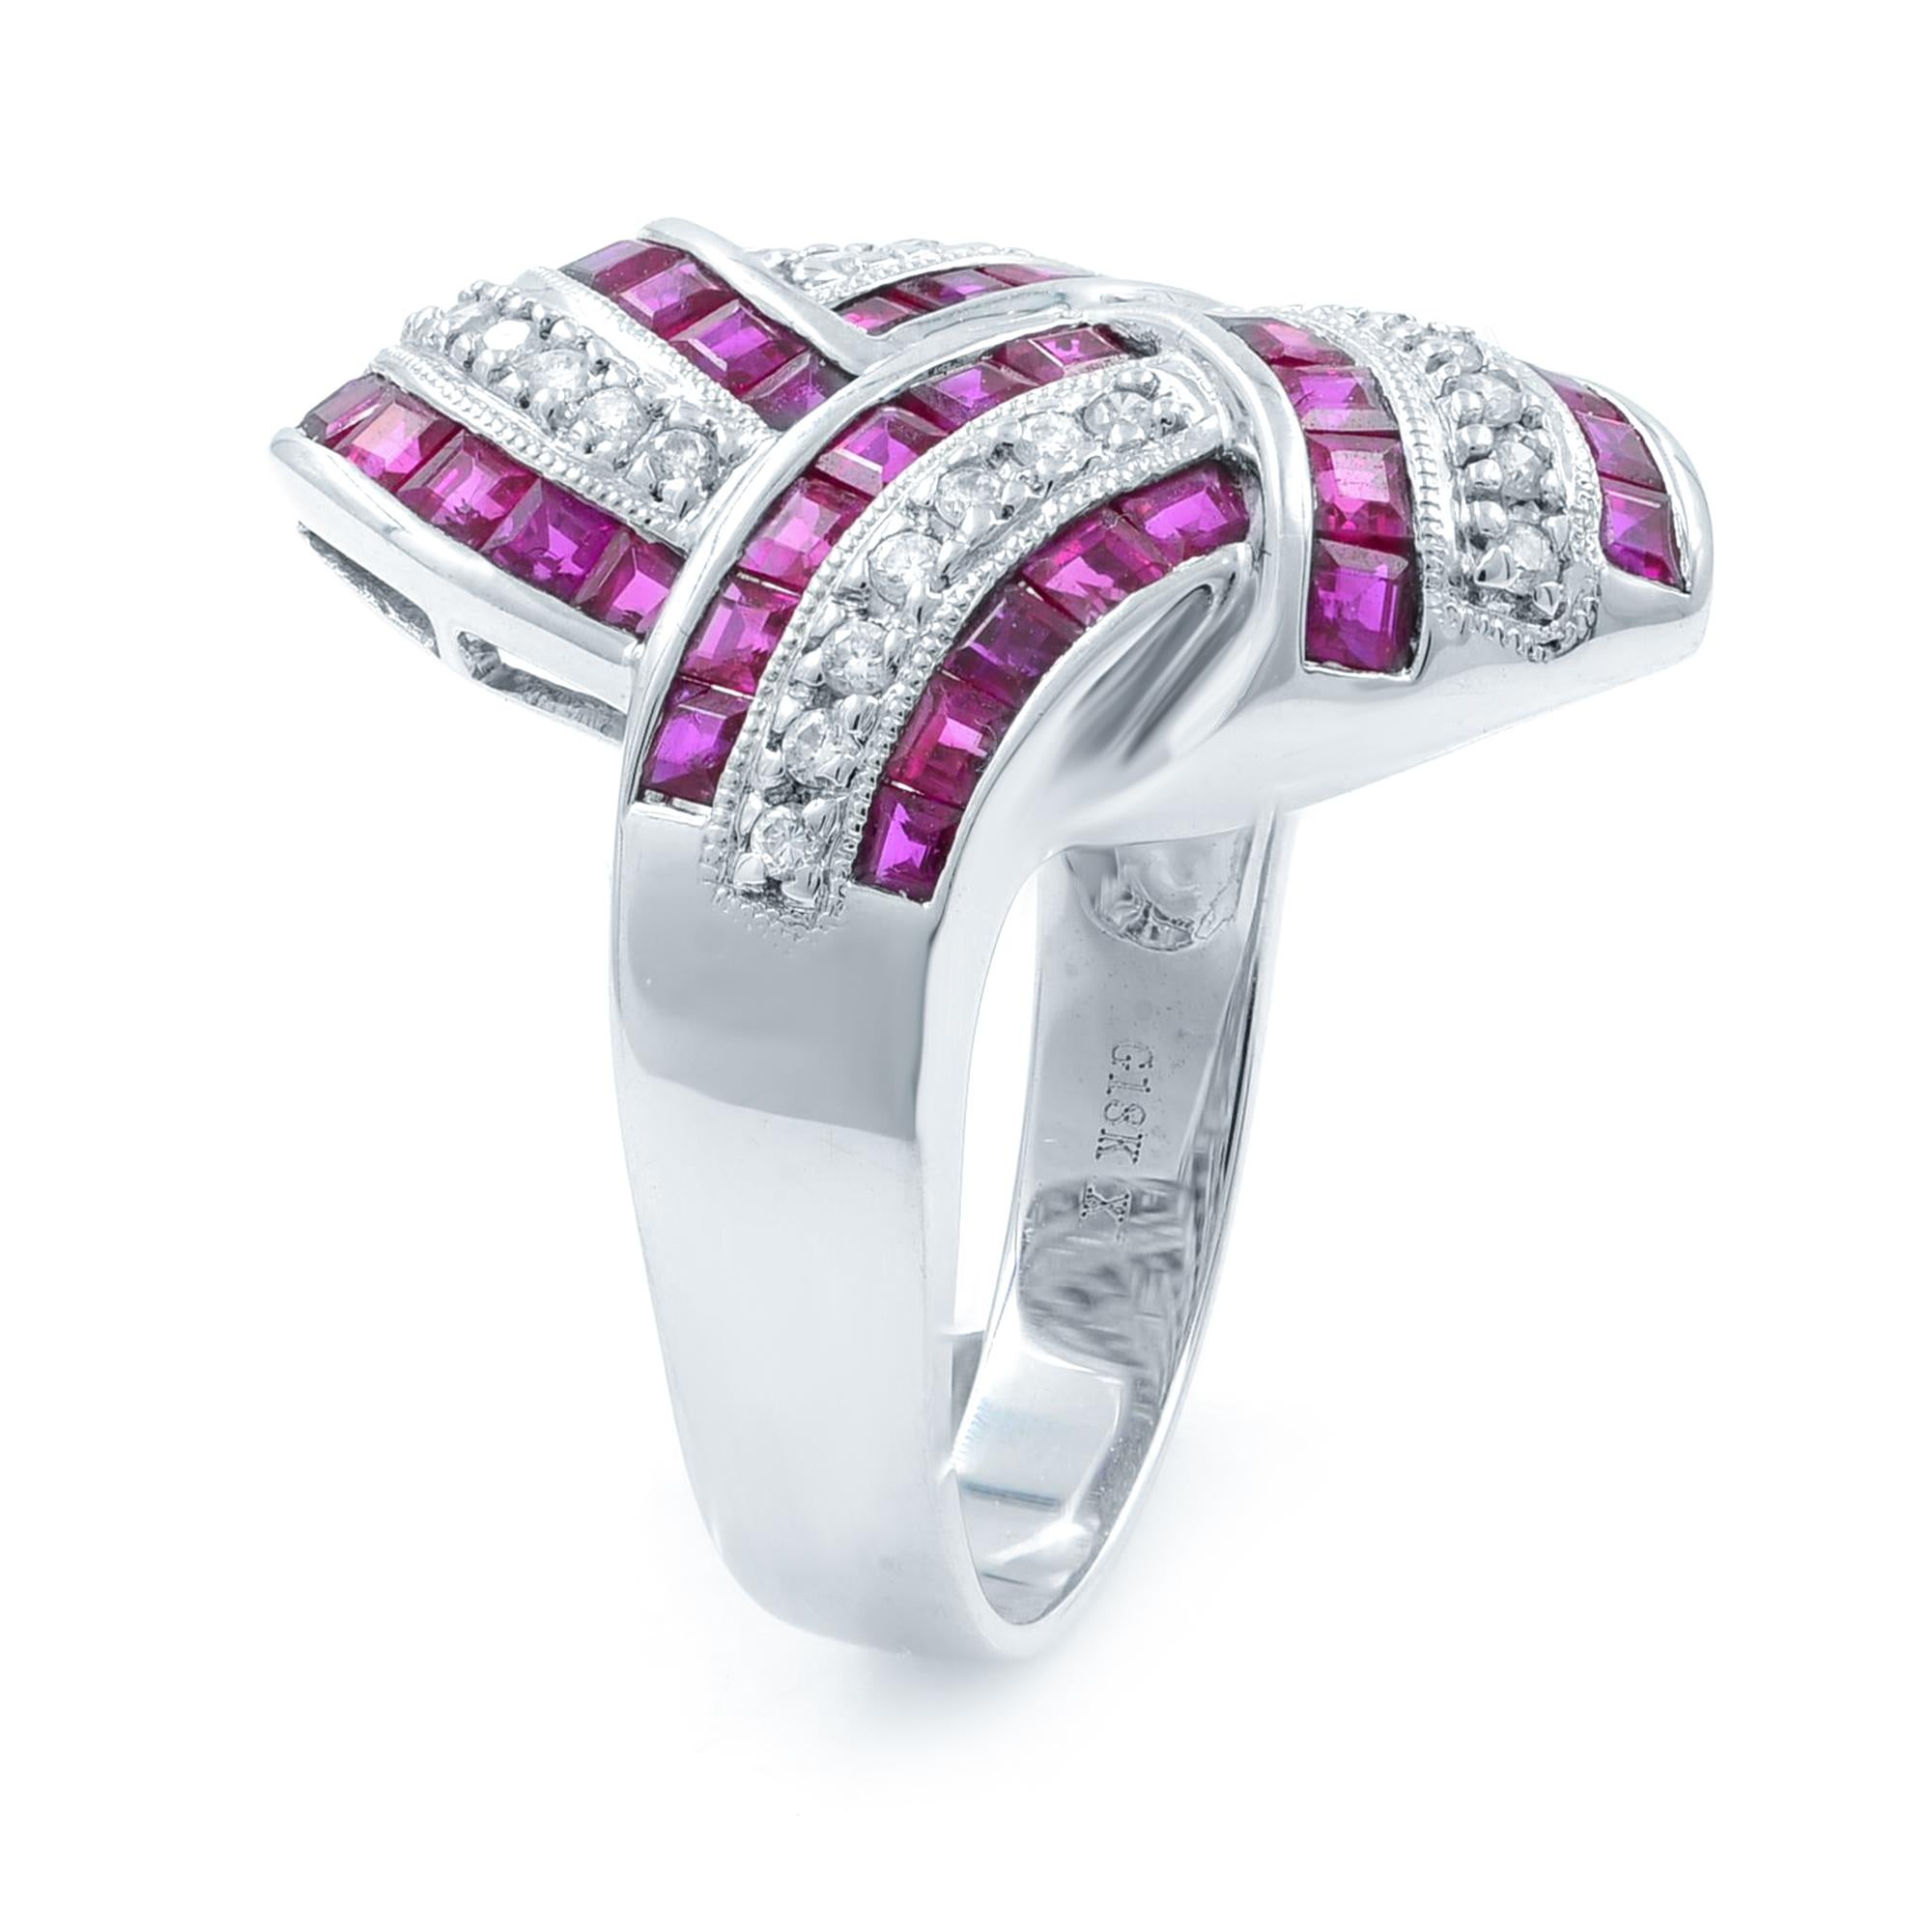 This sleekly styled modern band ring flashes with rows of bright, seamlessly-set square-cut rubies bordered by seamlessly-set vibrant diamonds. A blazingly beautiful and impressive estate jewel, sturdily crafted in gleaming 18k white gold. Ring size